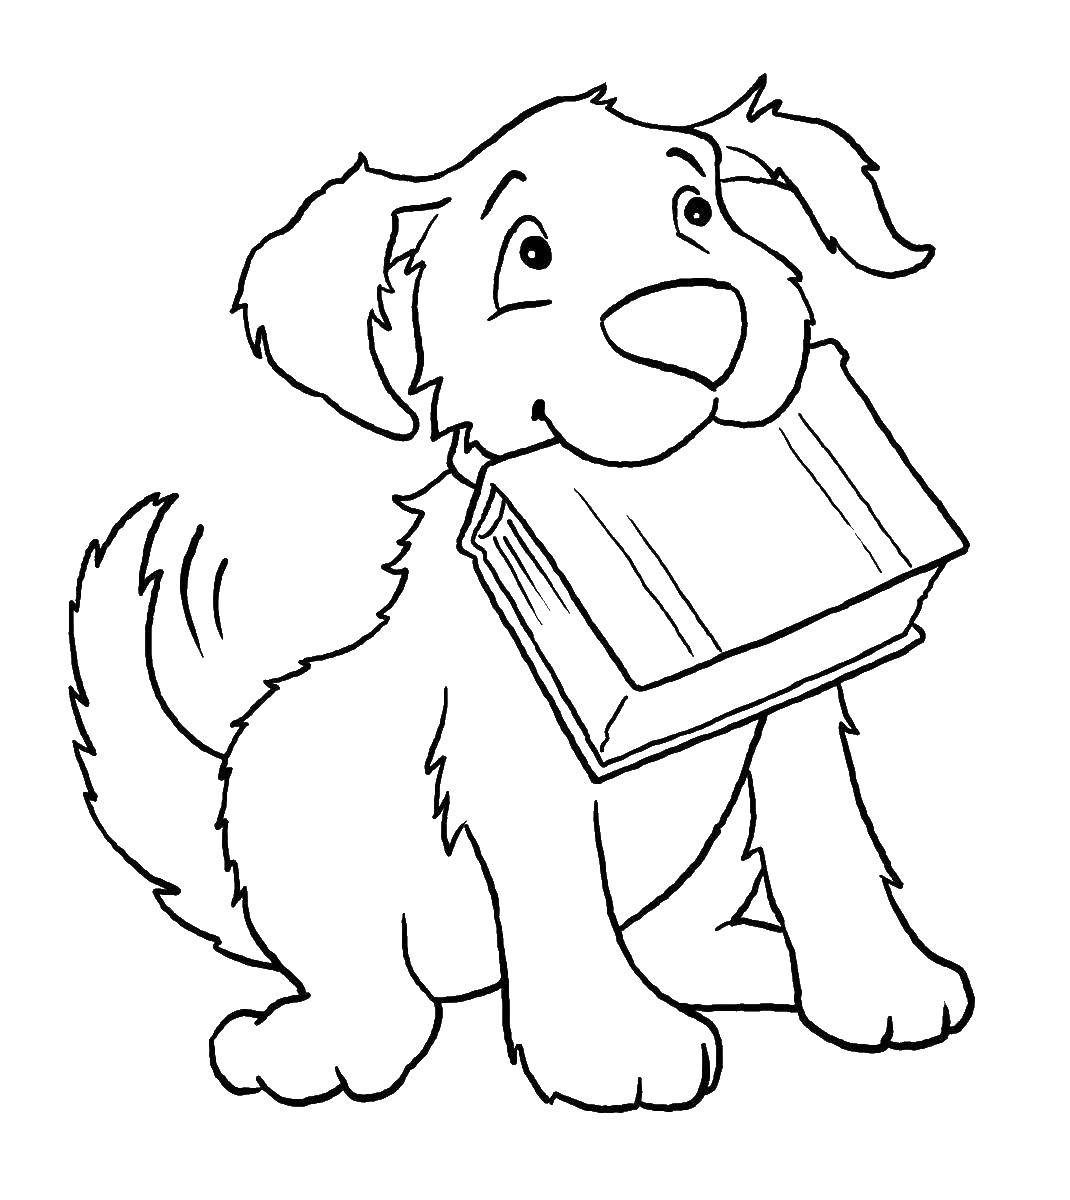 Coloring Dog with book in his mouth. Category dogs. Tags:  the dog.